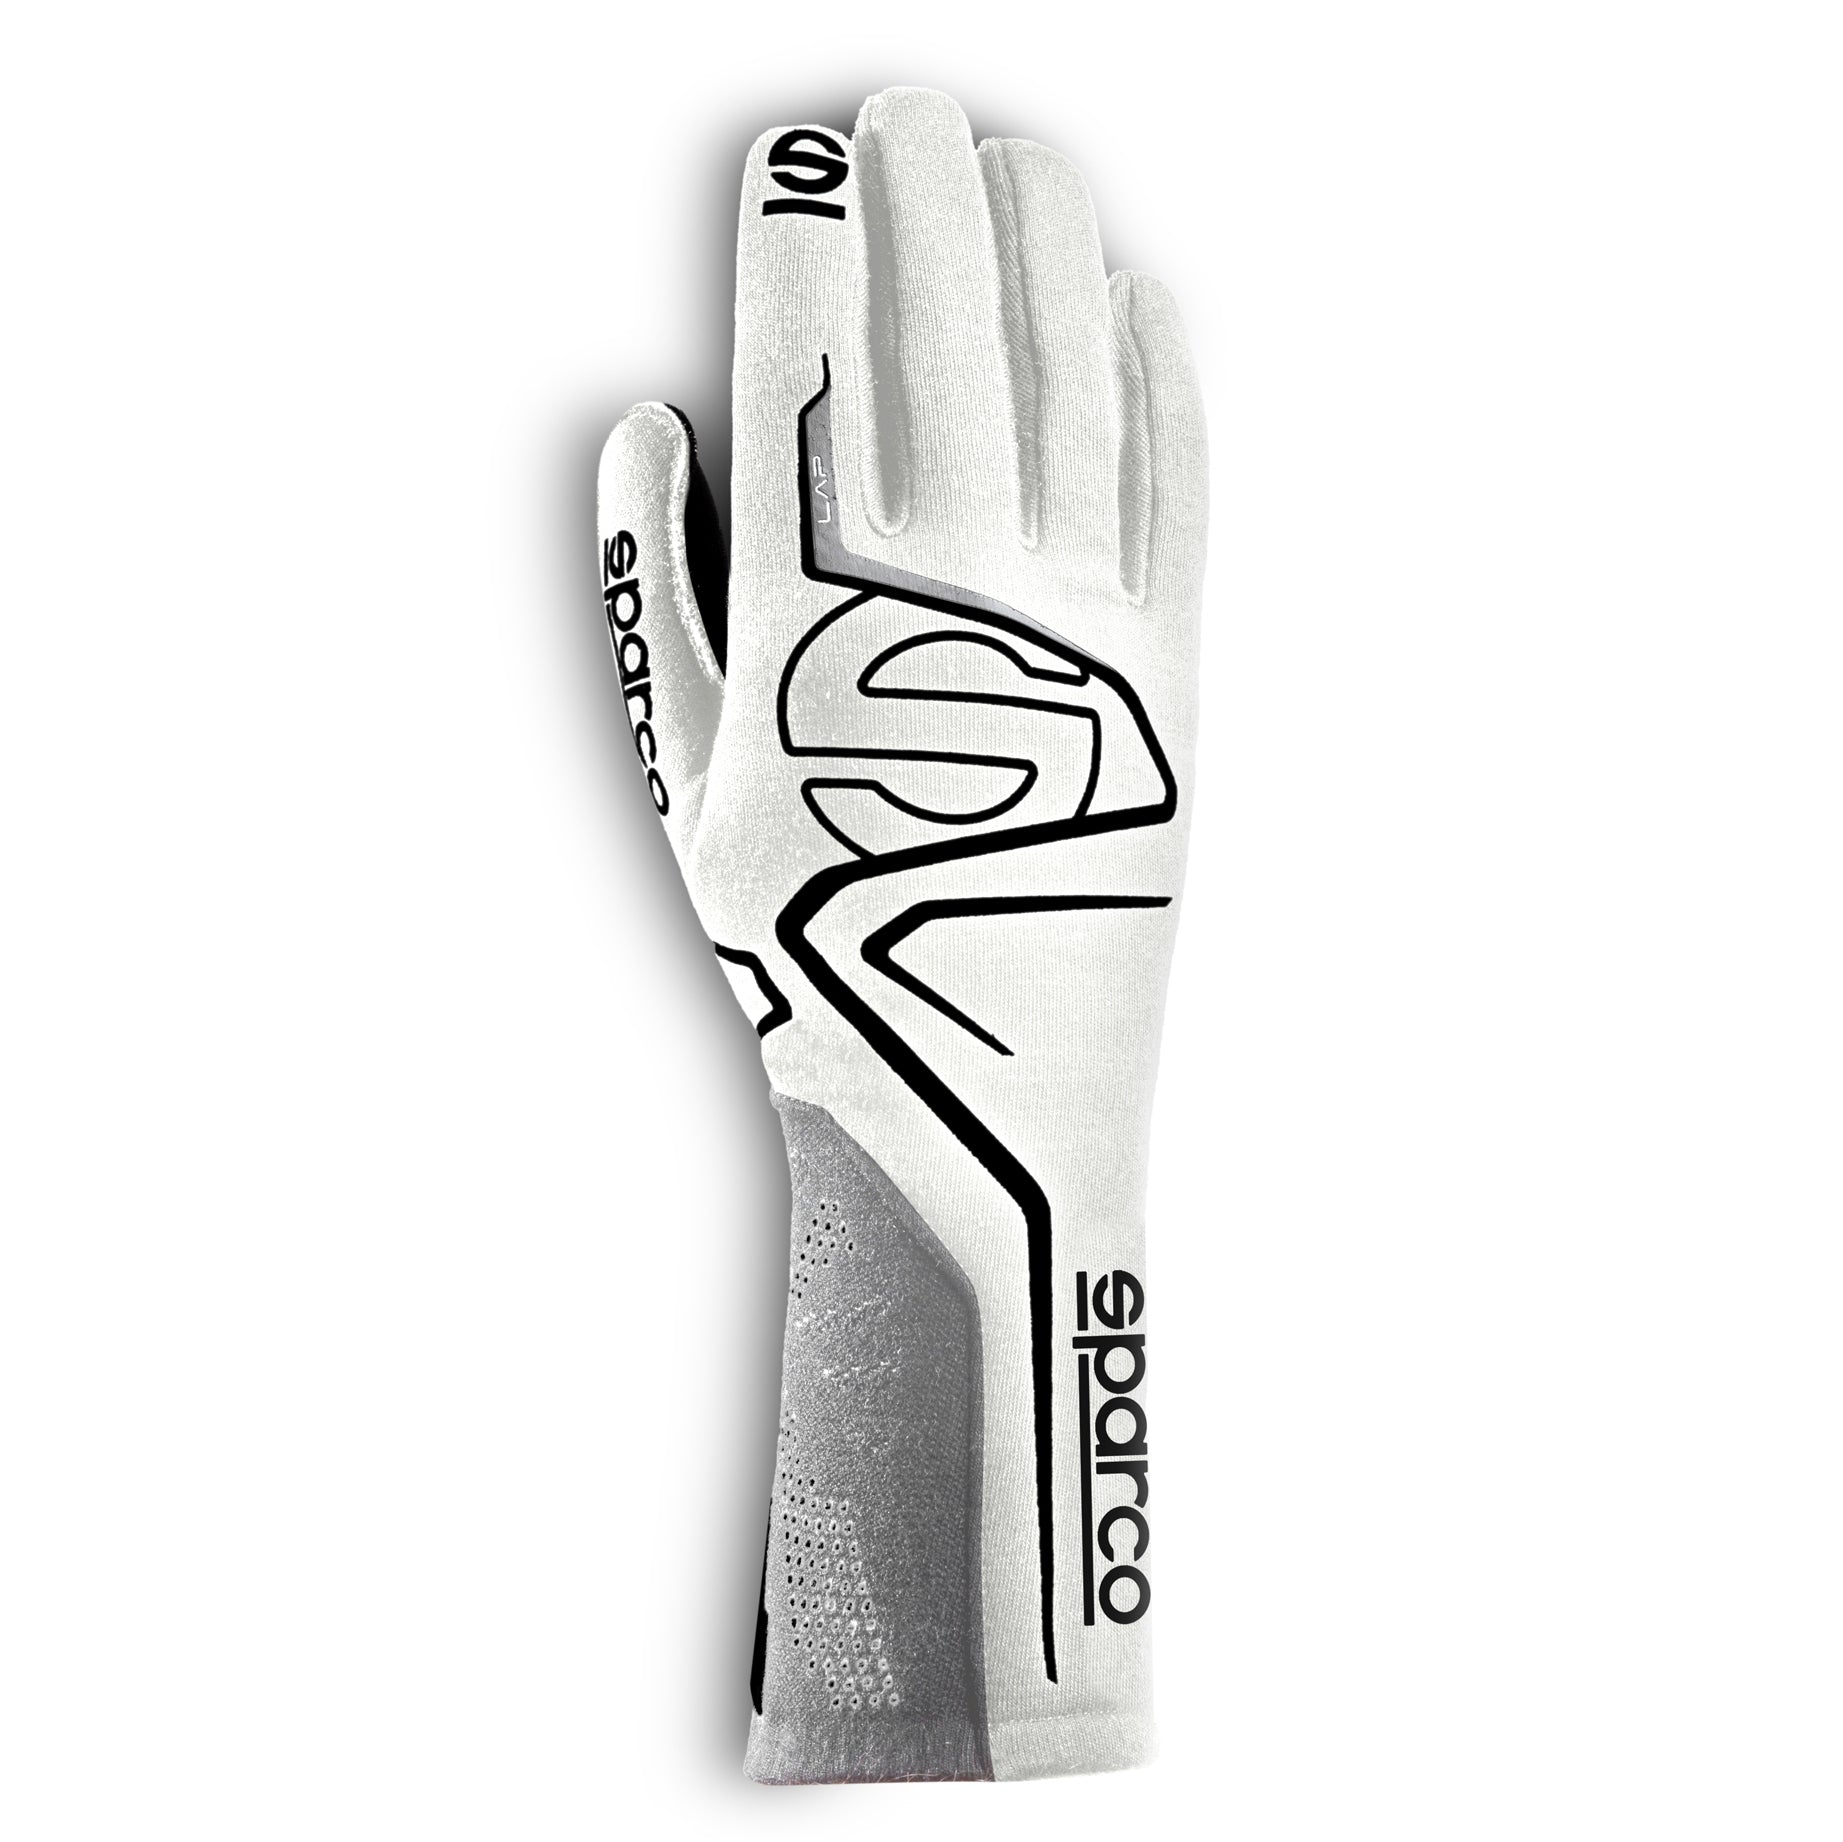 Get Your Sparco Meca-3 Mechanics Gloves - Black from Sparco